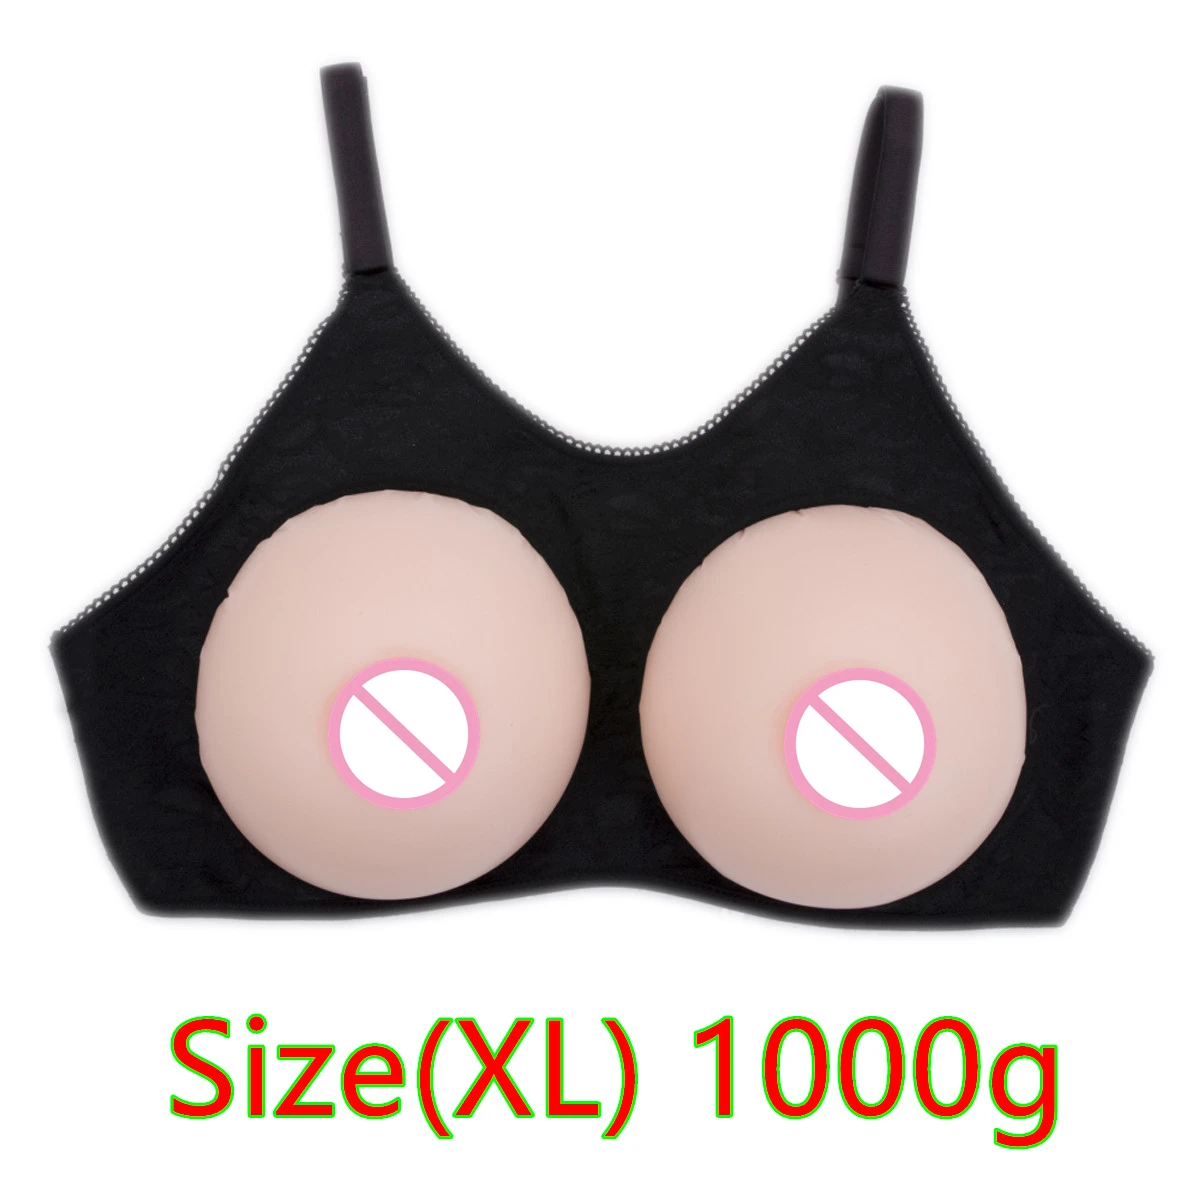 1000g/pair Fake Boobs False Breasts Artificial Breast Silicone Breast Forms For Men Crossdresser Drag Queen Shemale Transgender